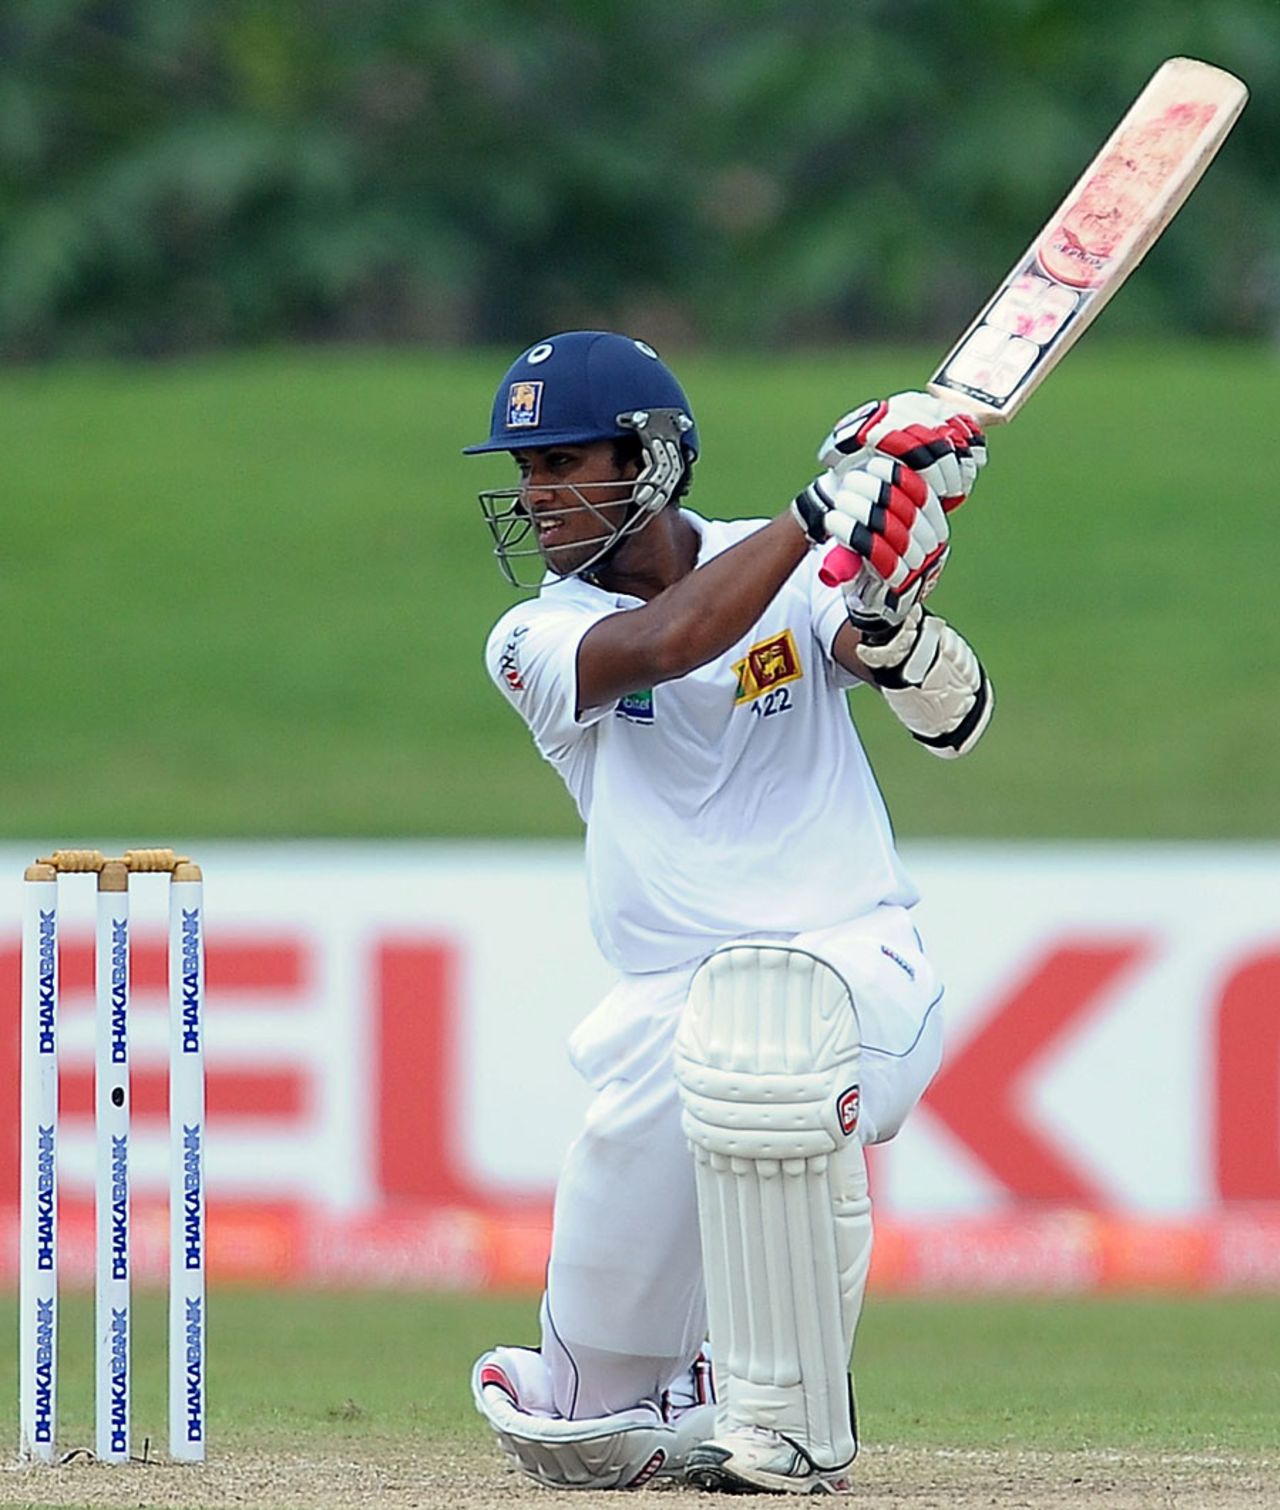 Dinesh Chandimal drives square during his century, Sri Lanka v Bangladesh, 1st Test, Galle, 2nd day, March 9, 2013